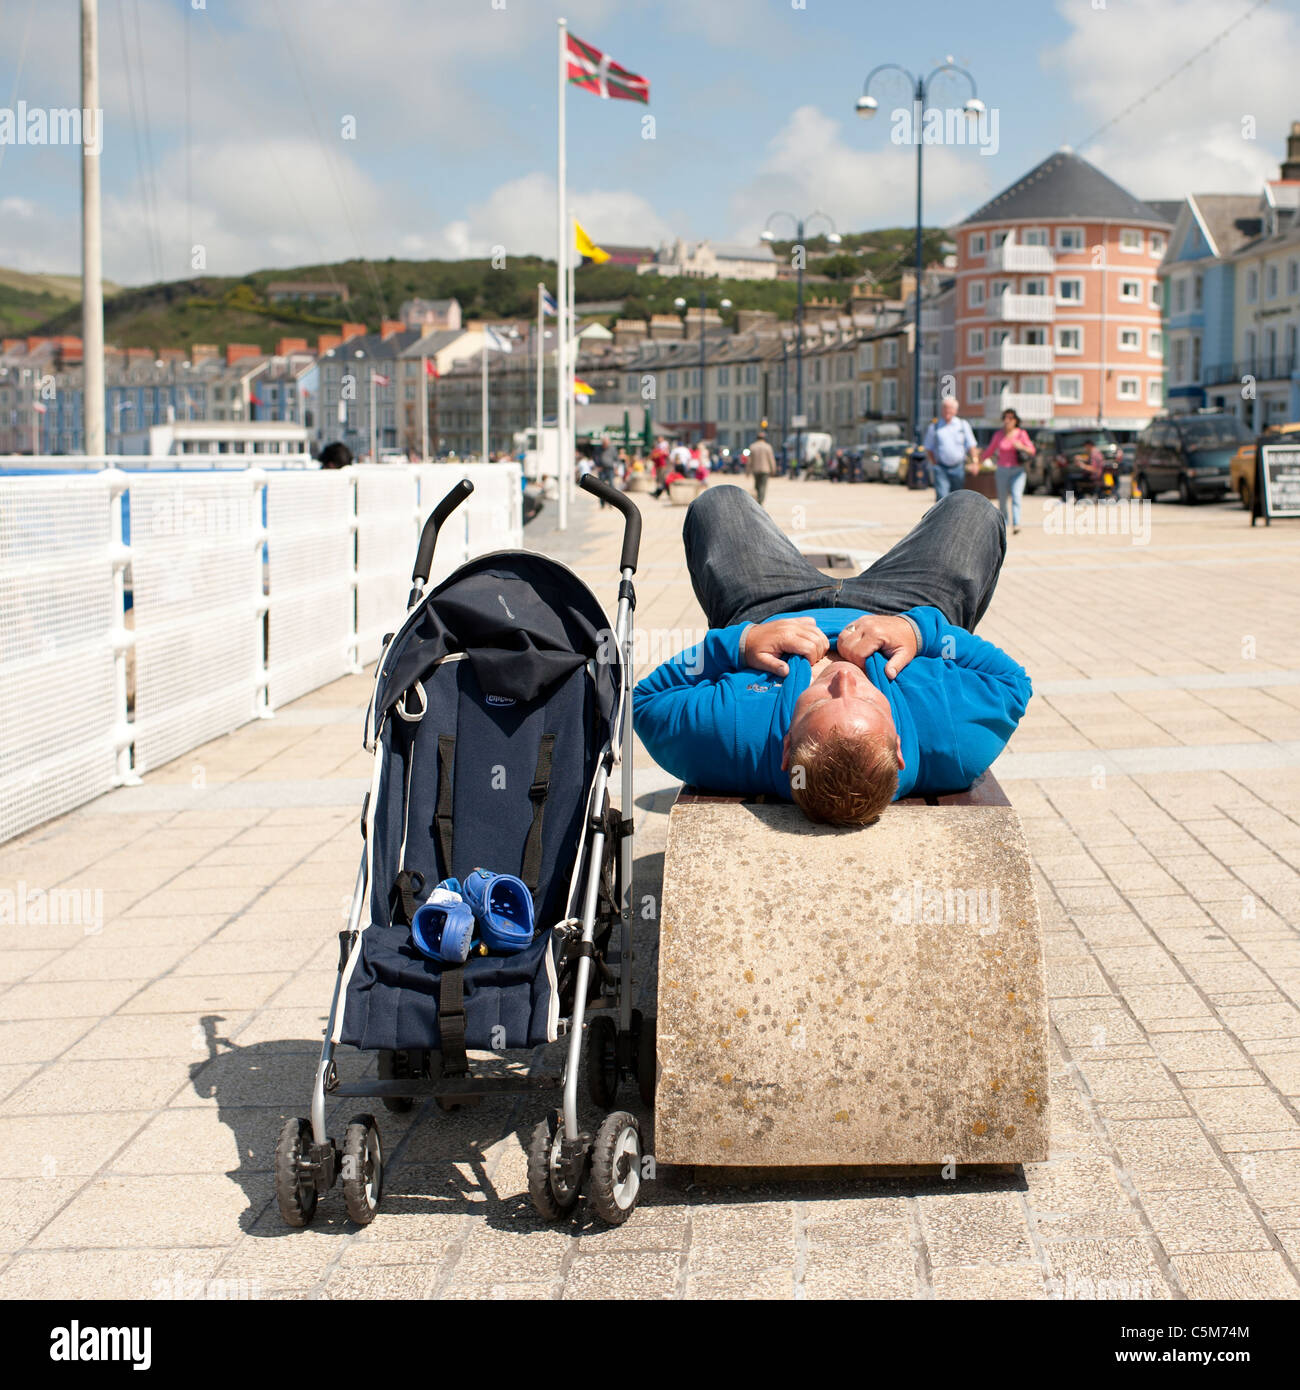 a man lying down on a seaside bench next to an empty kids buggy, aberystwyth wales uk Stock Photo